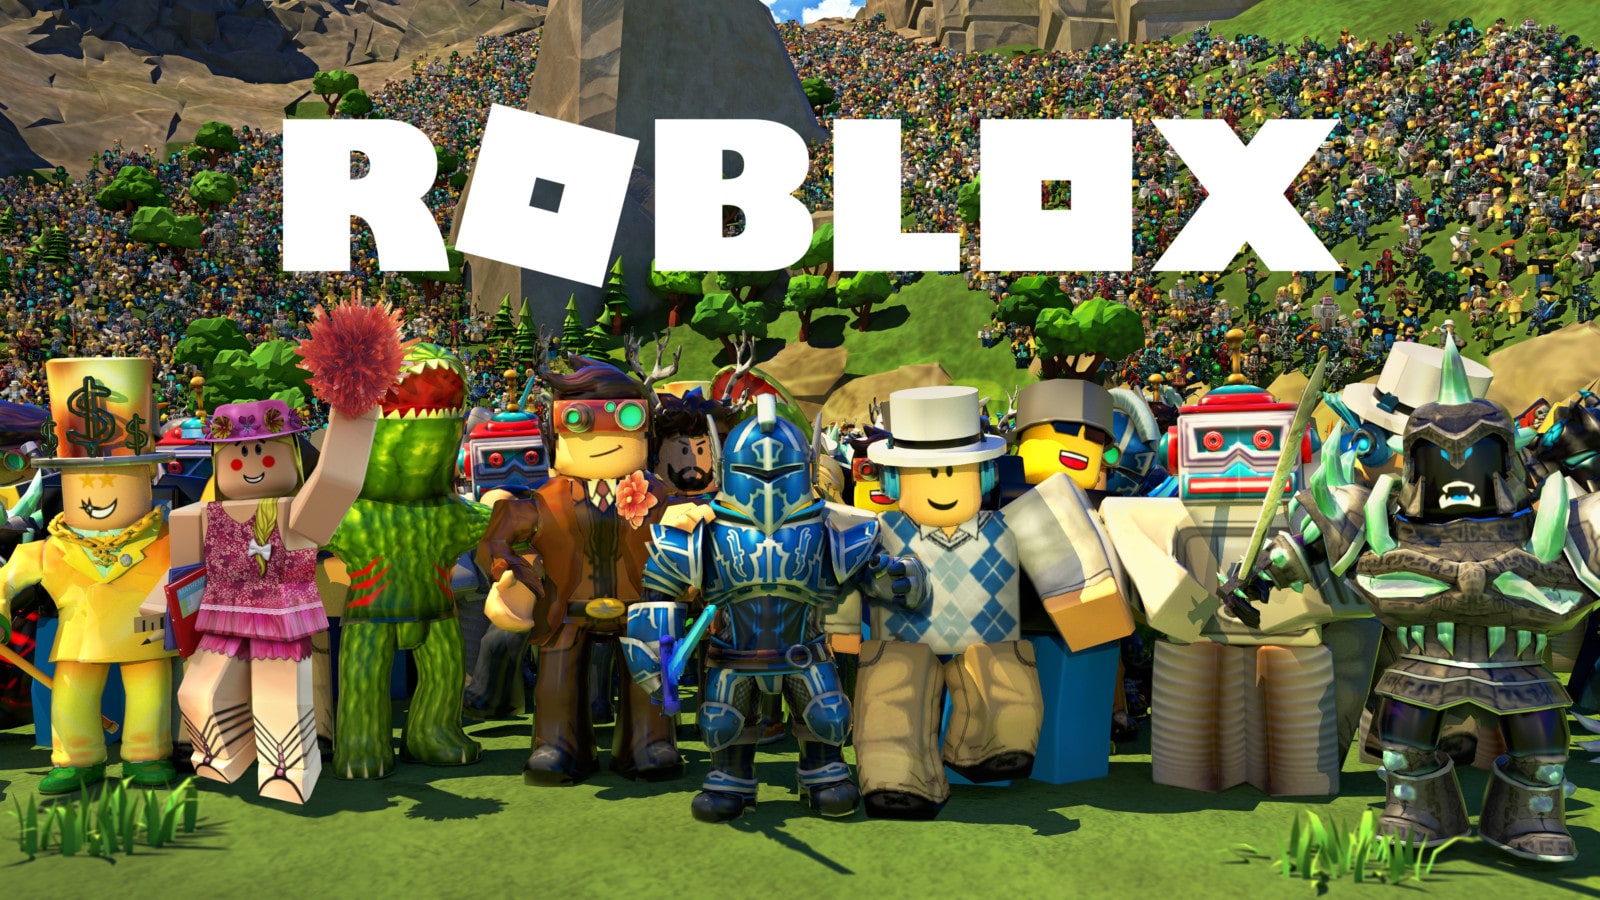 CascadiaJS 🇺🇸 🇨🇦 on X: 2/ Build a Game with @Roblox (ages 10